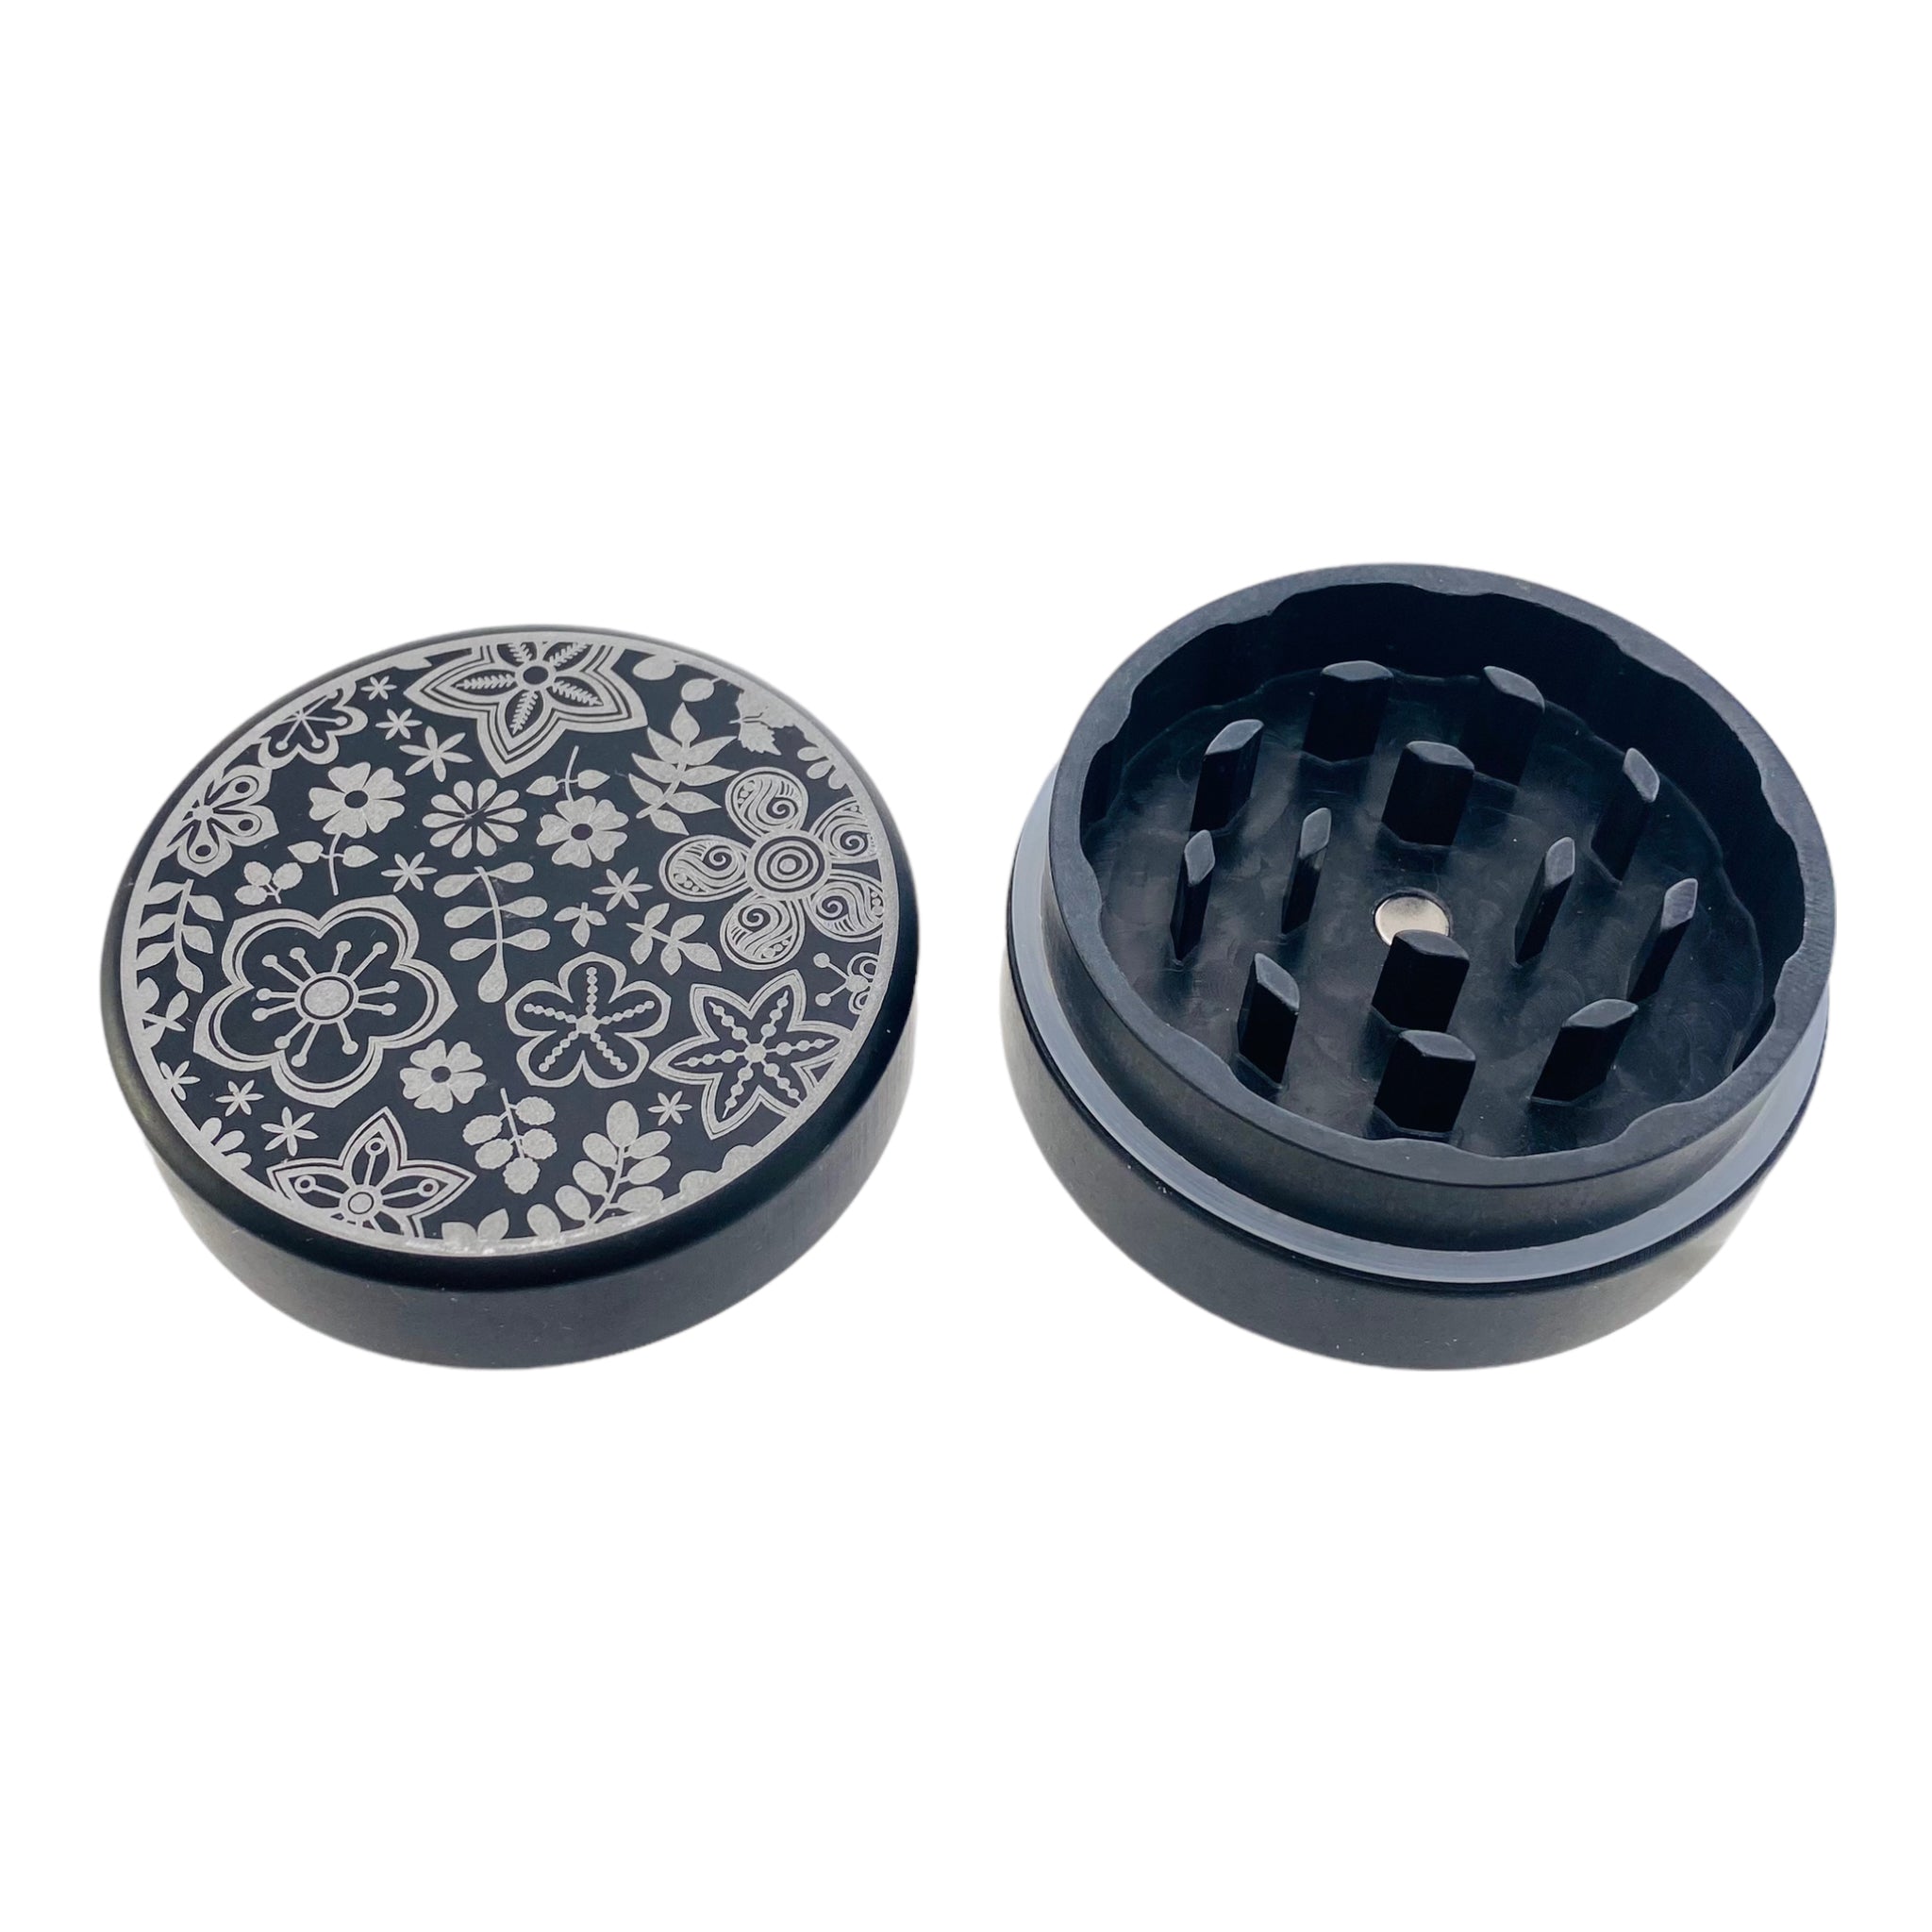 Tahoe Grinders - Black Anodized Aluminum Large Two Piece Herb Grinder With Flowers And Stars